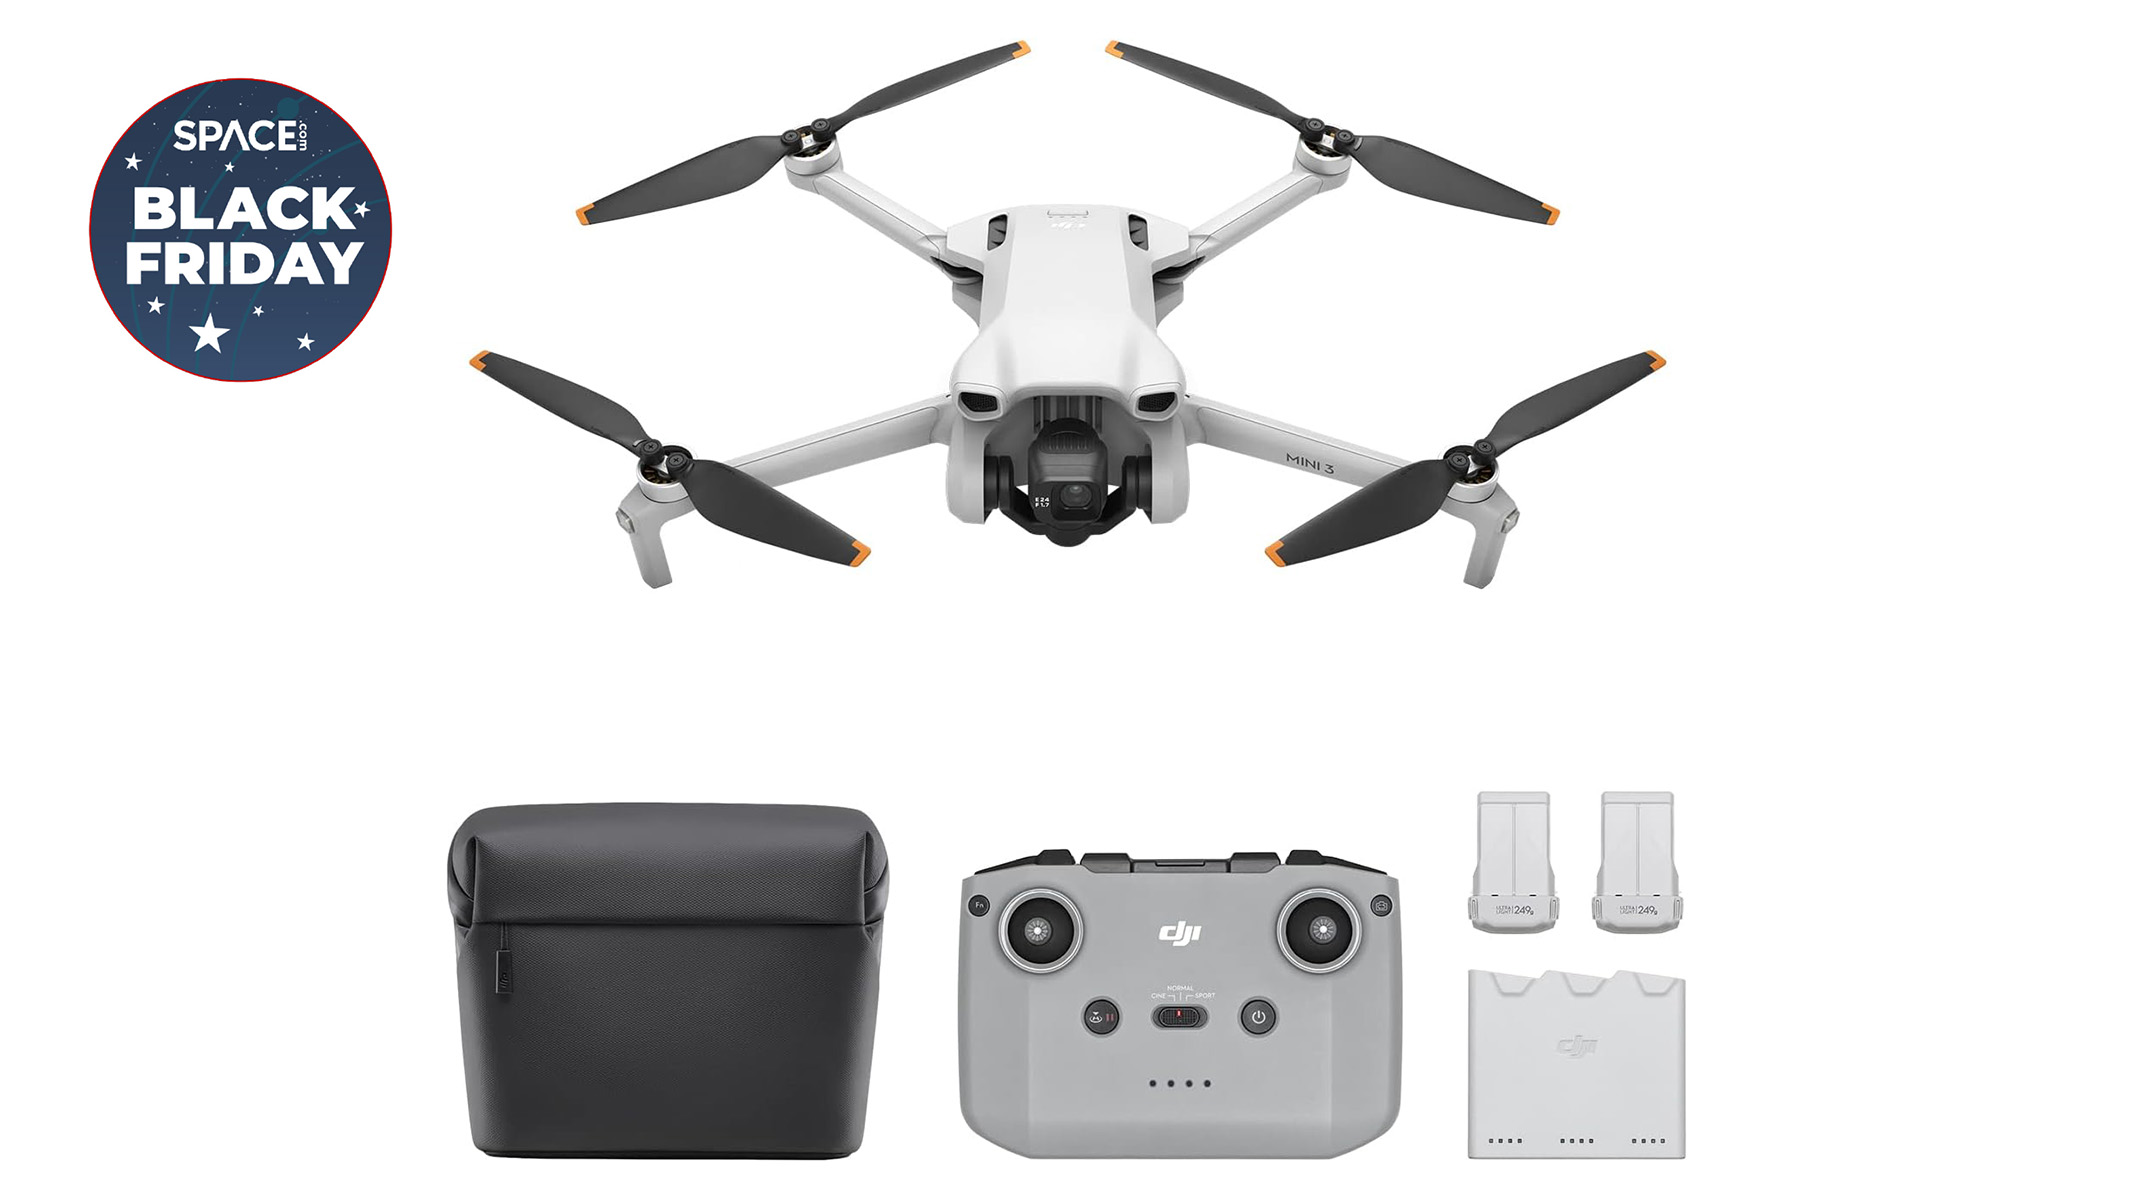 Black Friday beginner drone on sale — save $60 on the DJI Mini 3 Fly More Combo Space